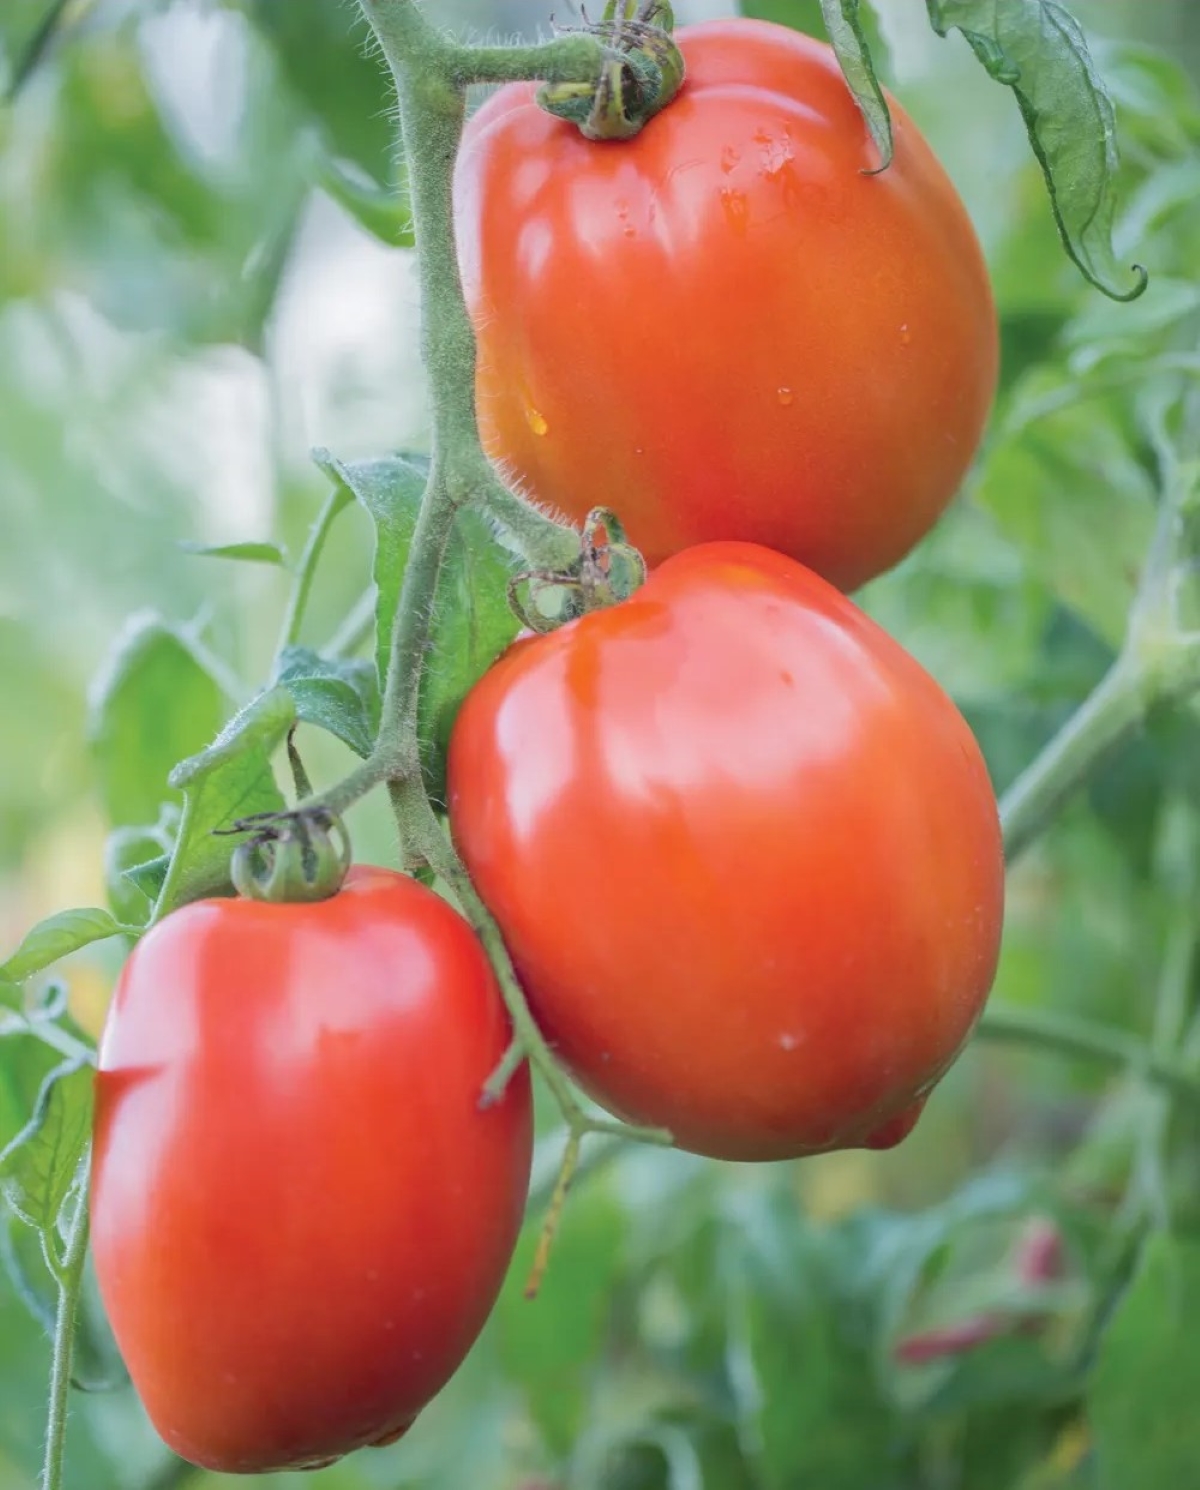 types of tomatoes - three red plum tomatoes